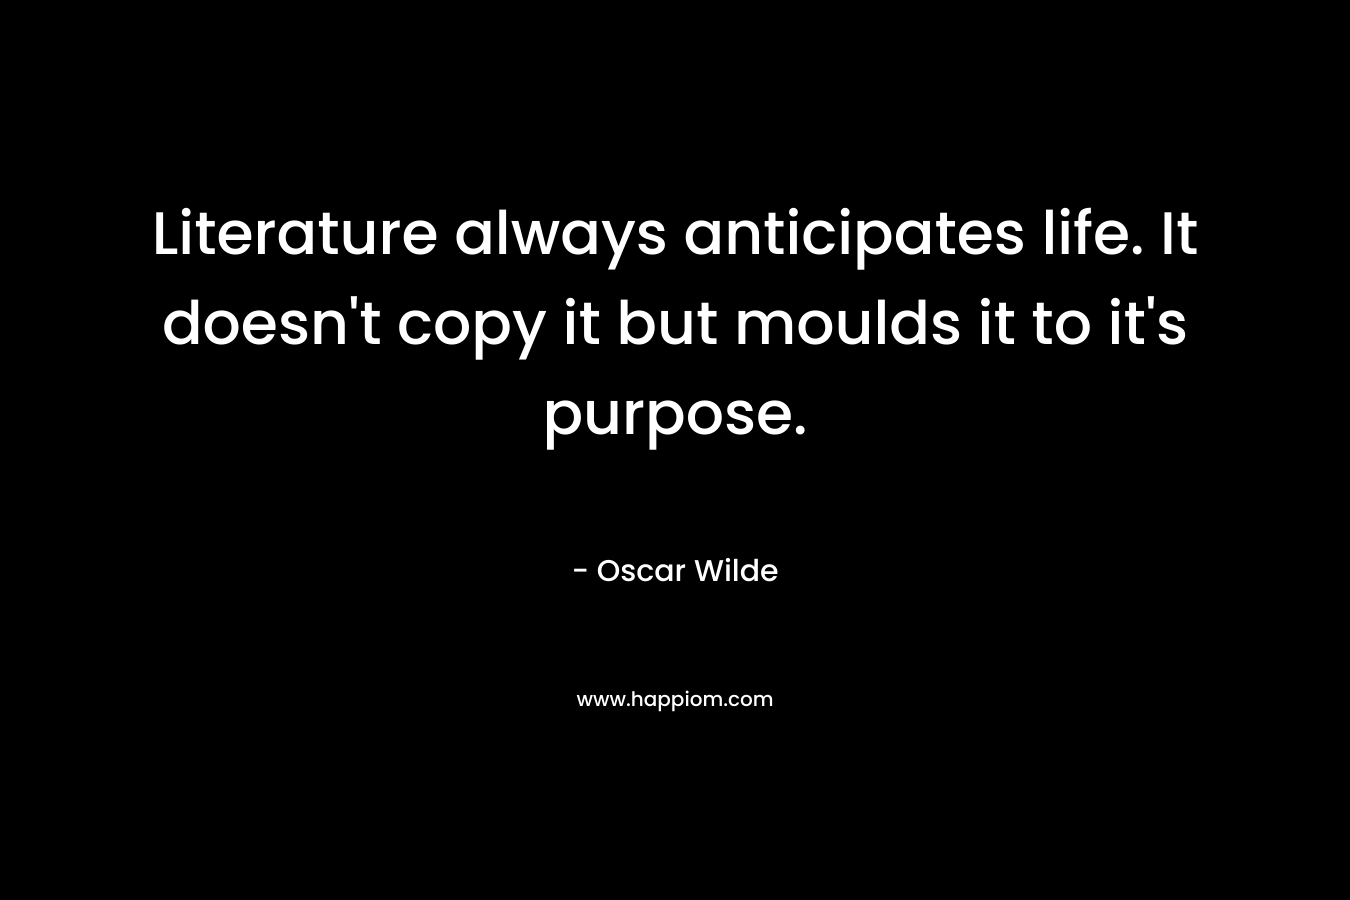 Literature always anticipates life. It doesn't copy it but moulds it to it's purpose.